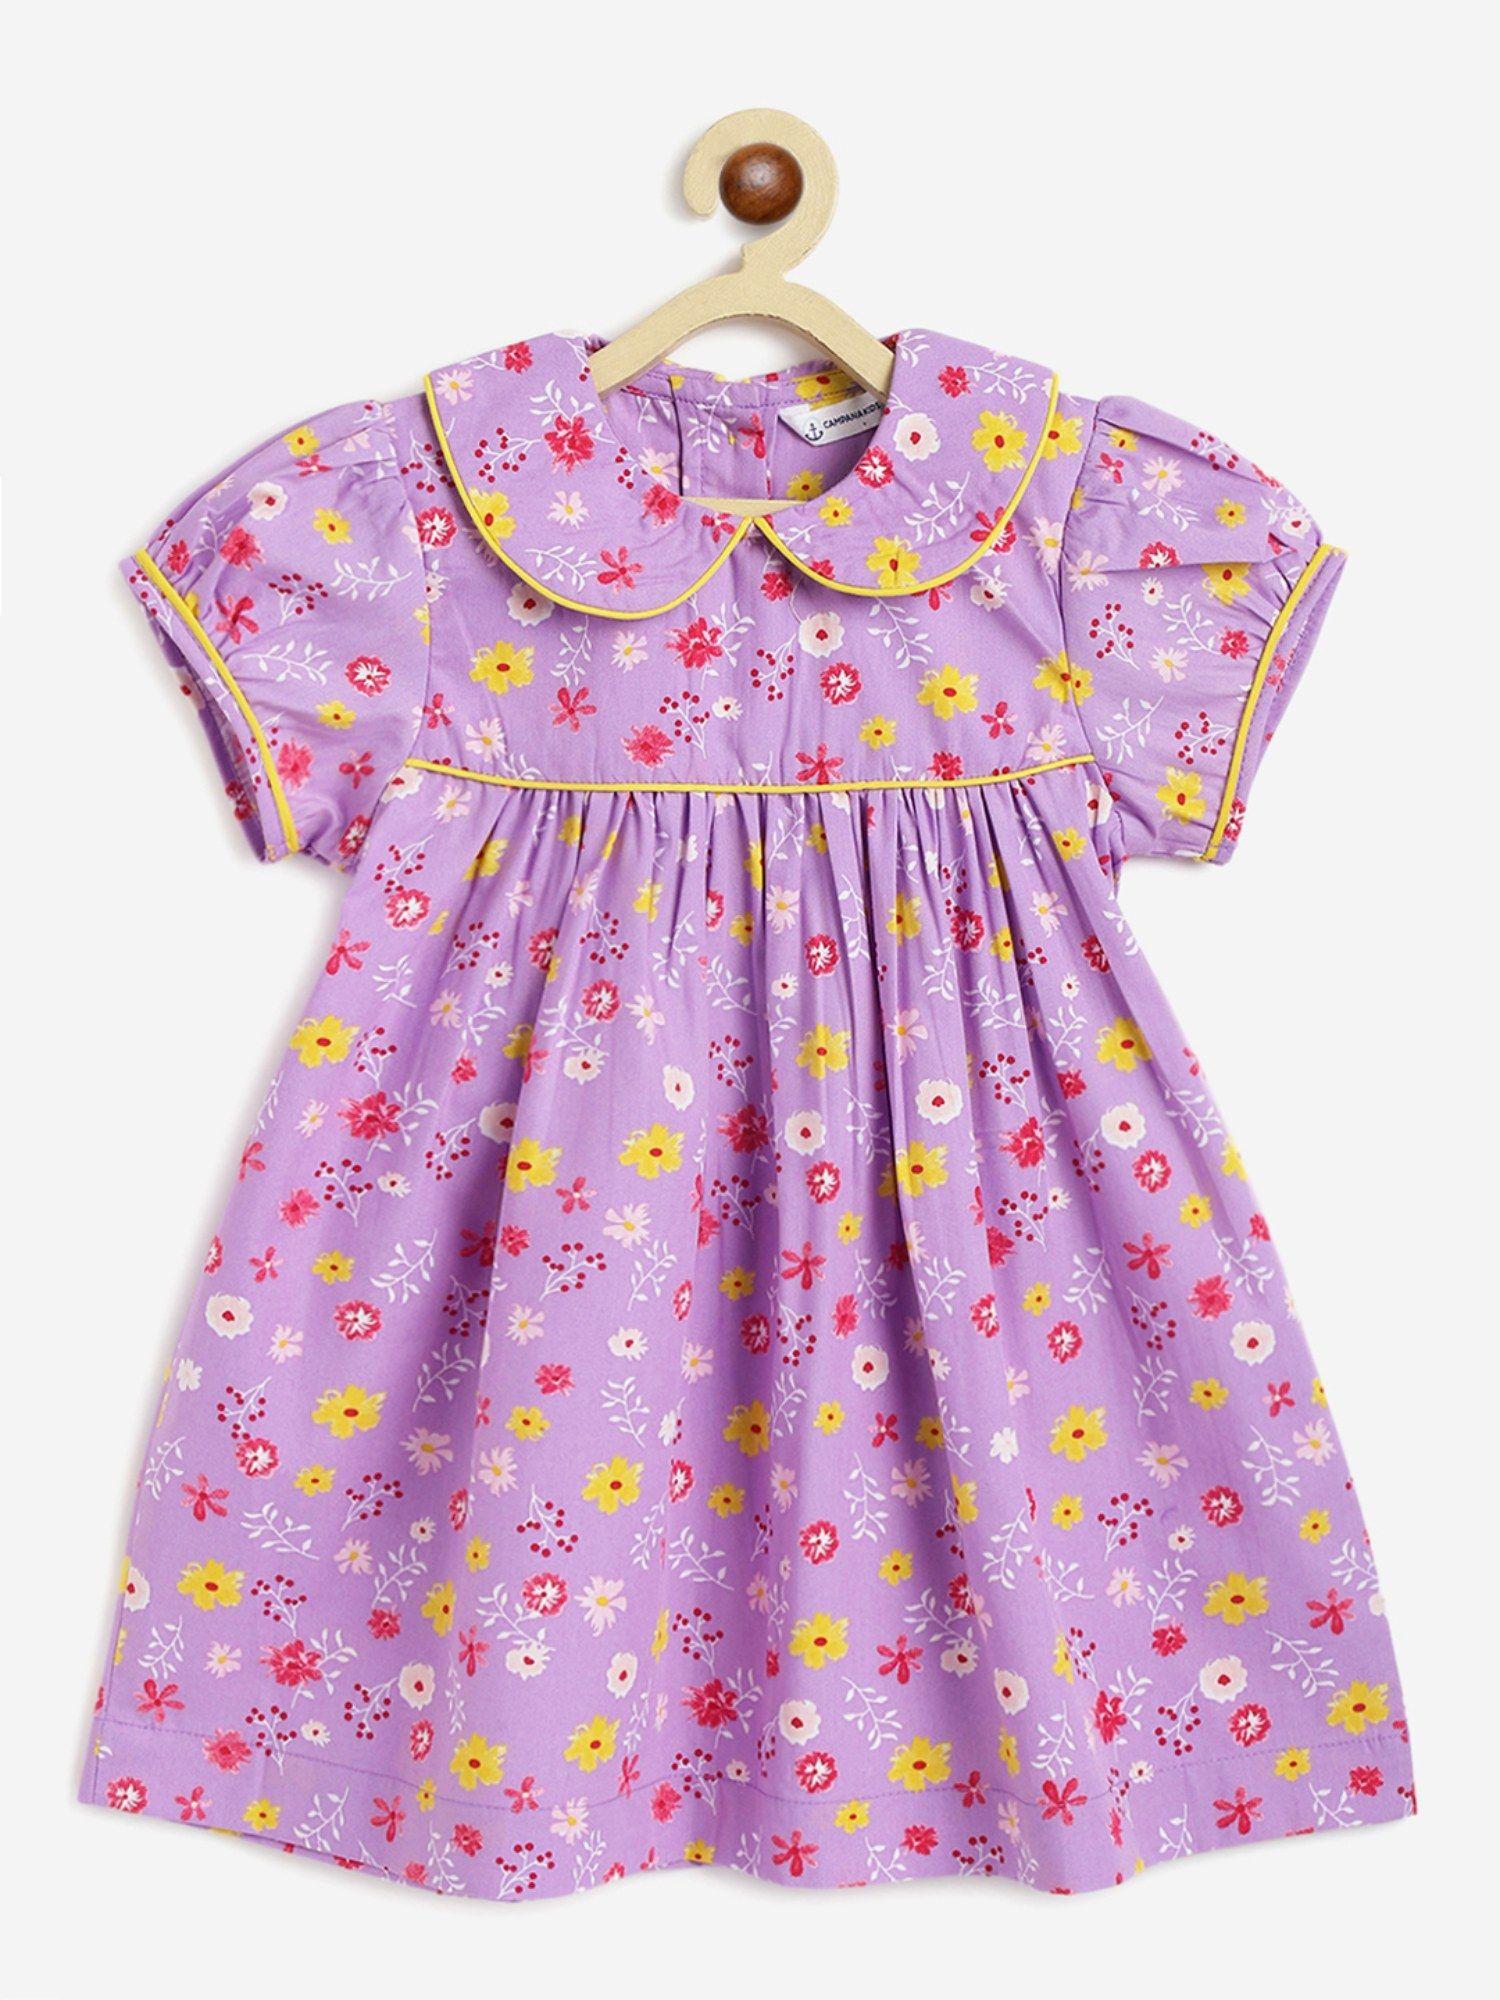 girls callie half sleeves dress with collar floral print purple yellow